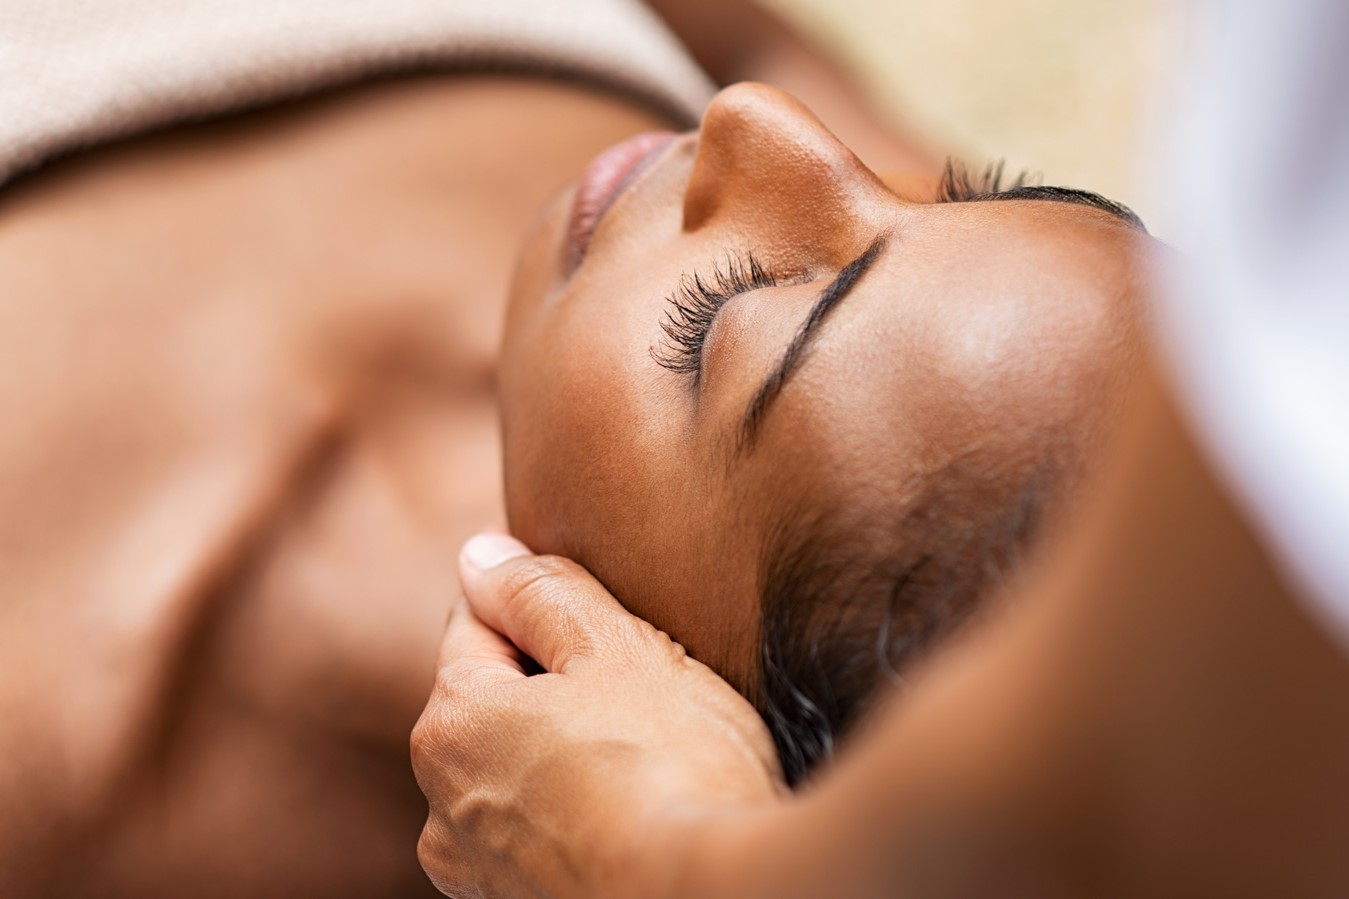 The Surprising Requests Massage Therapists Receive